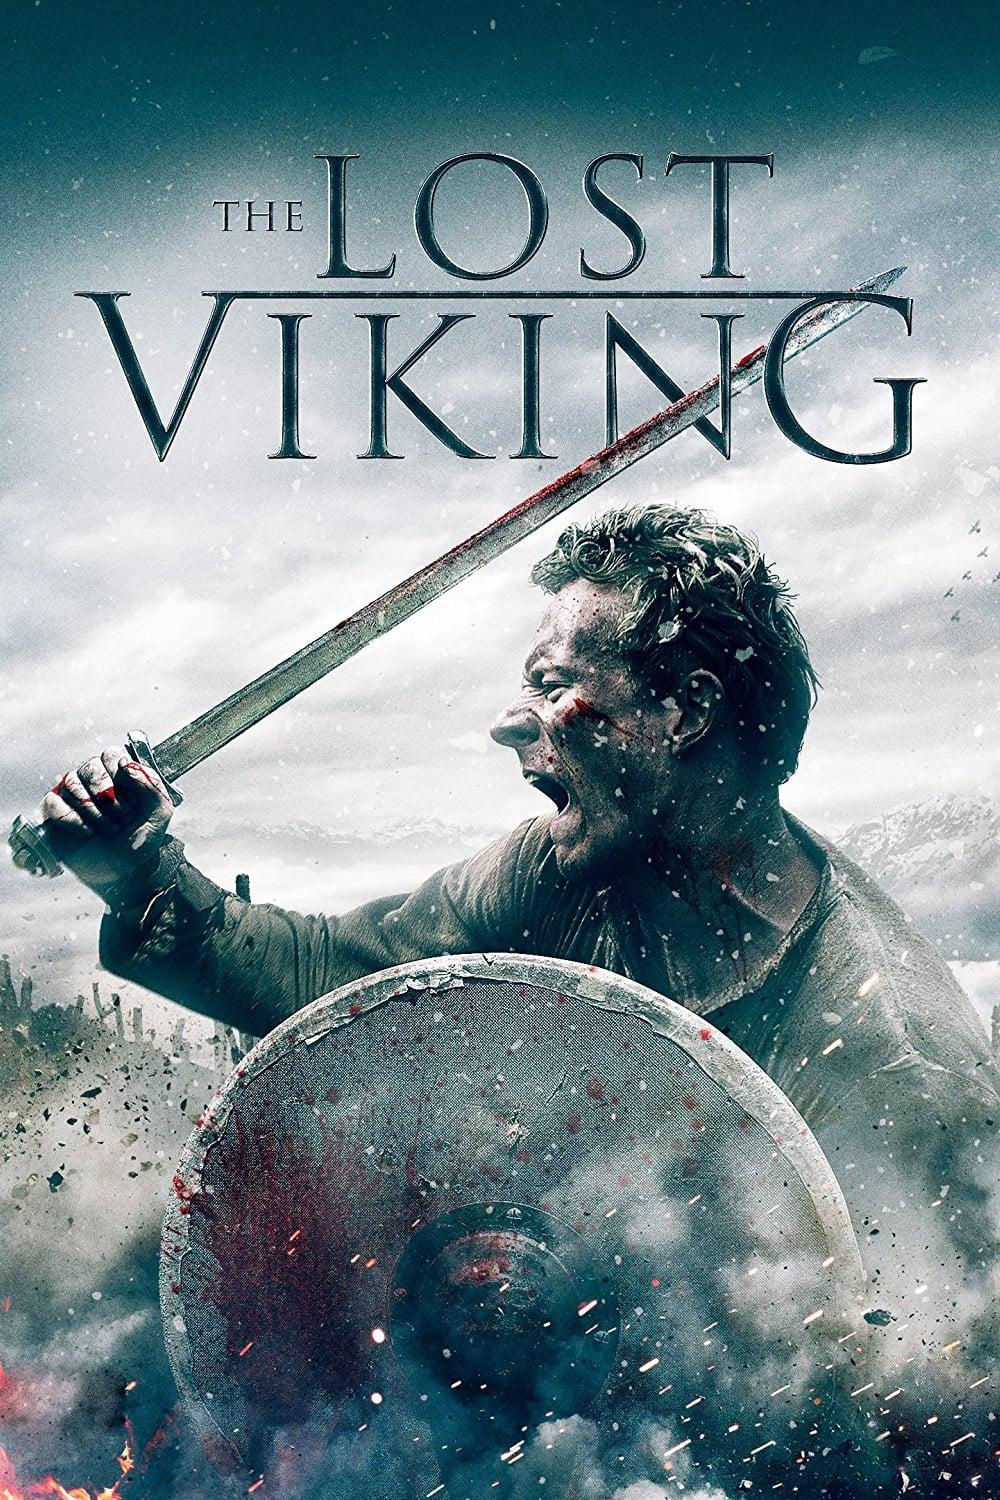 The Lost Viking poster